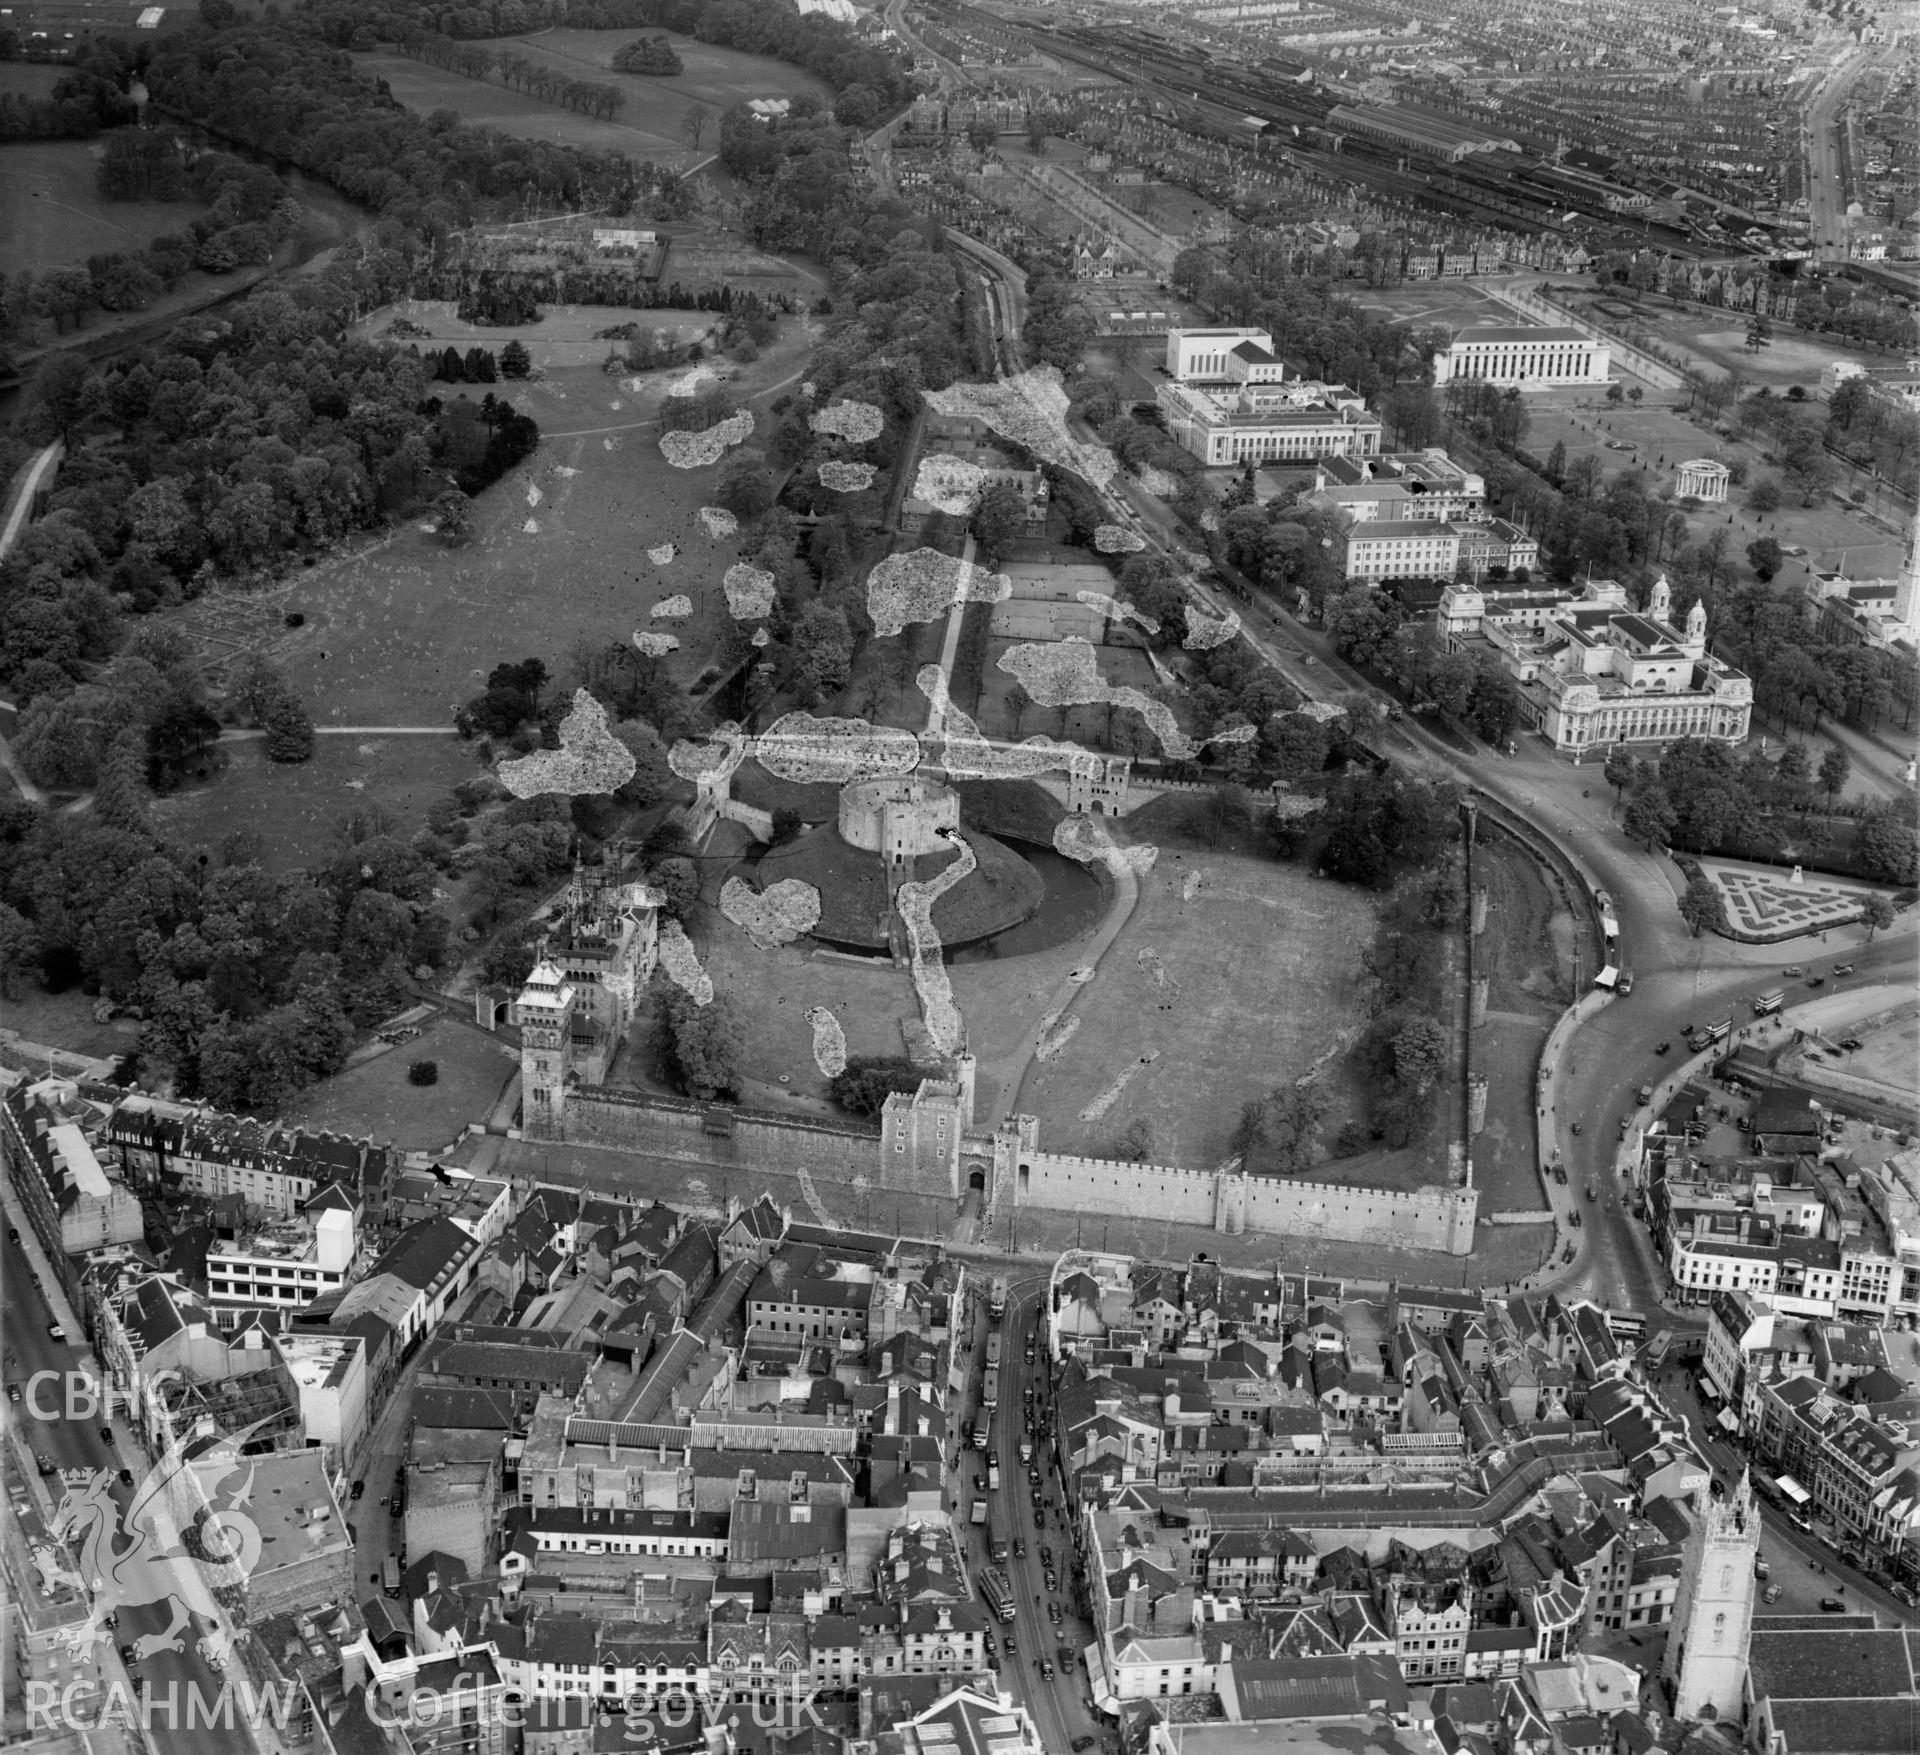 View of Cardiff showing the castle